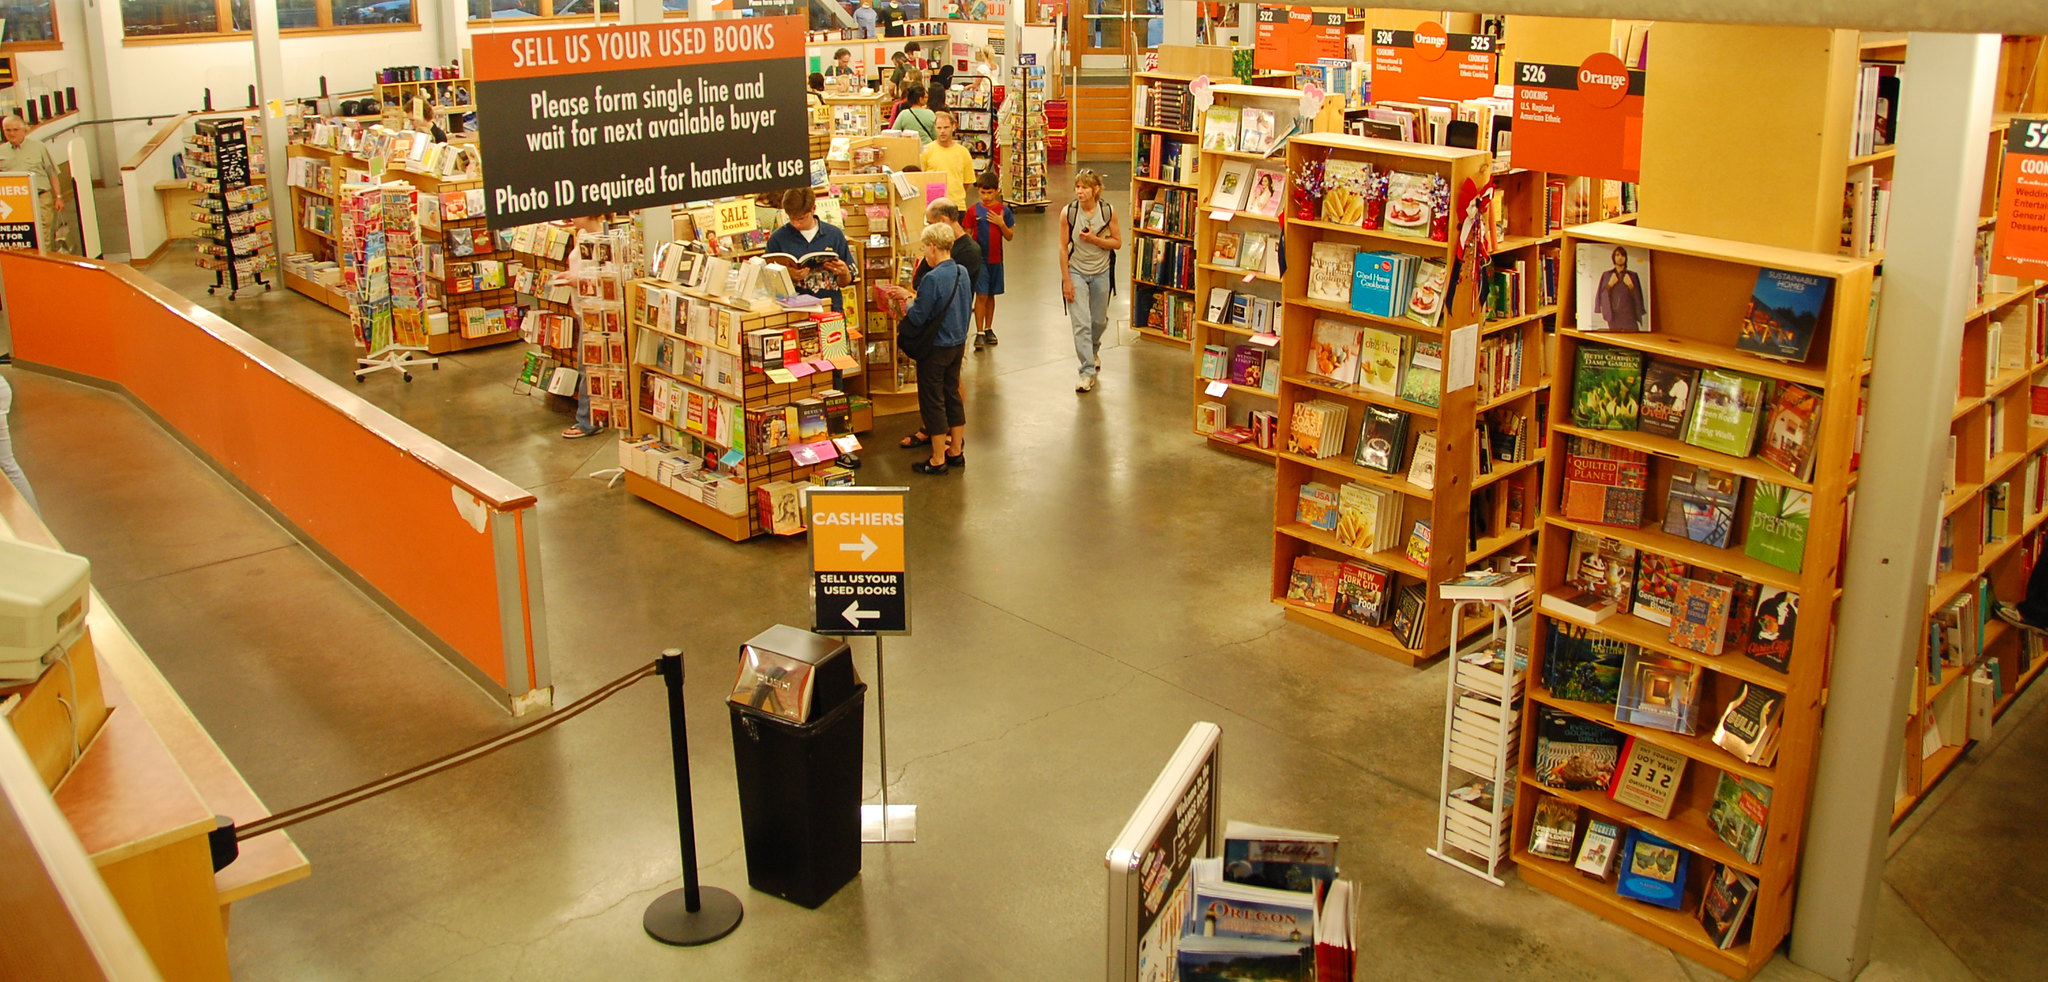 Powell’s Books is the World’s Largest New And Used Independent Bookstore